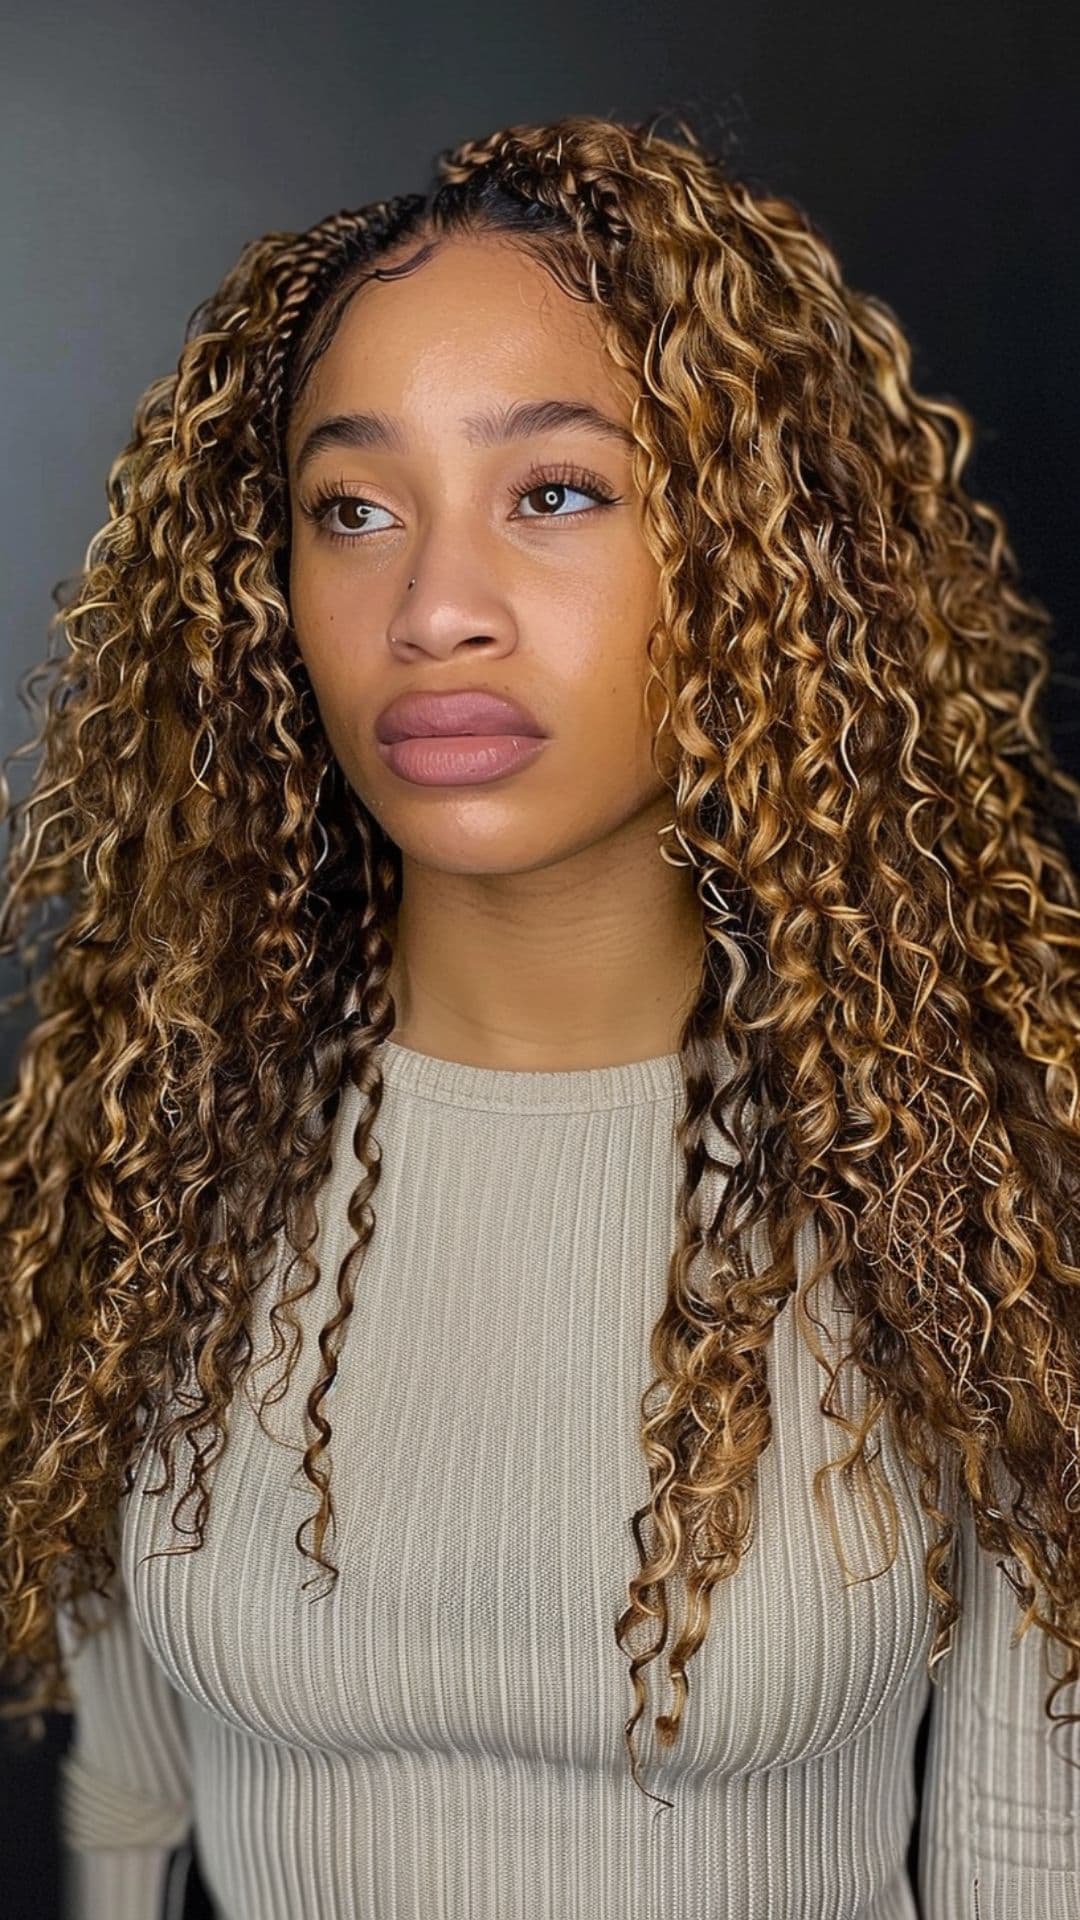 A woman modelling a toffee brown curly hair.